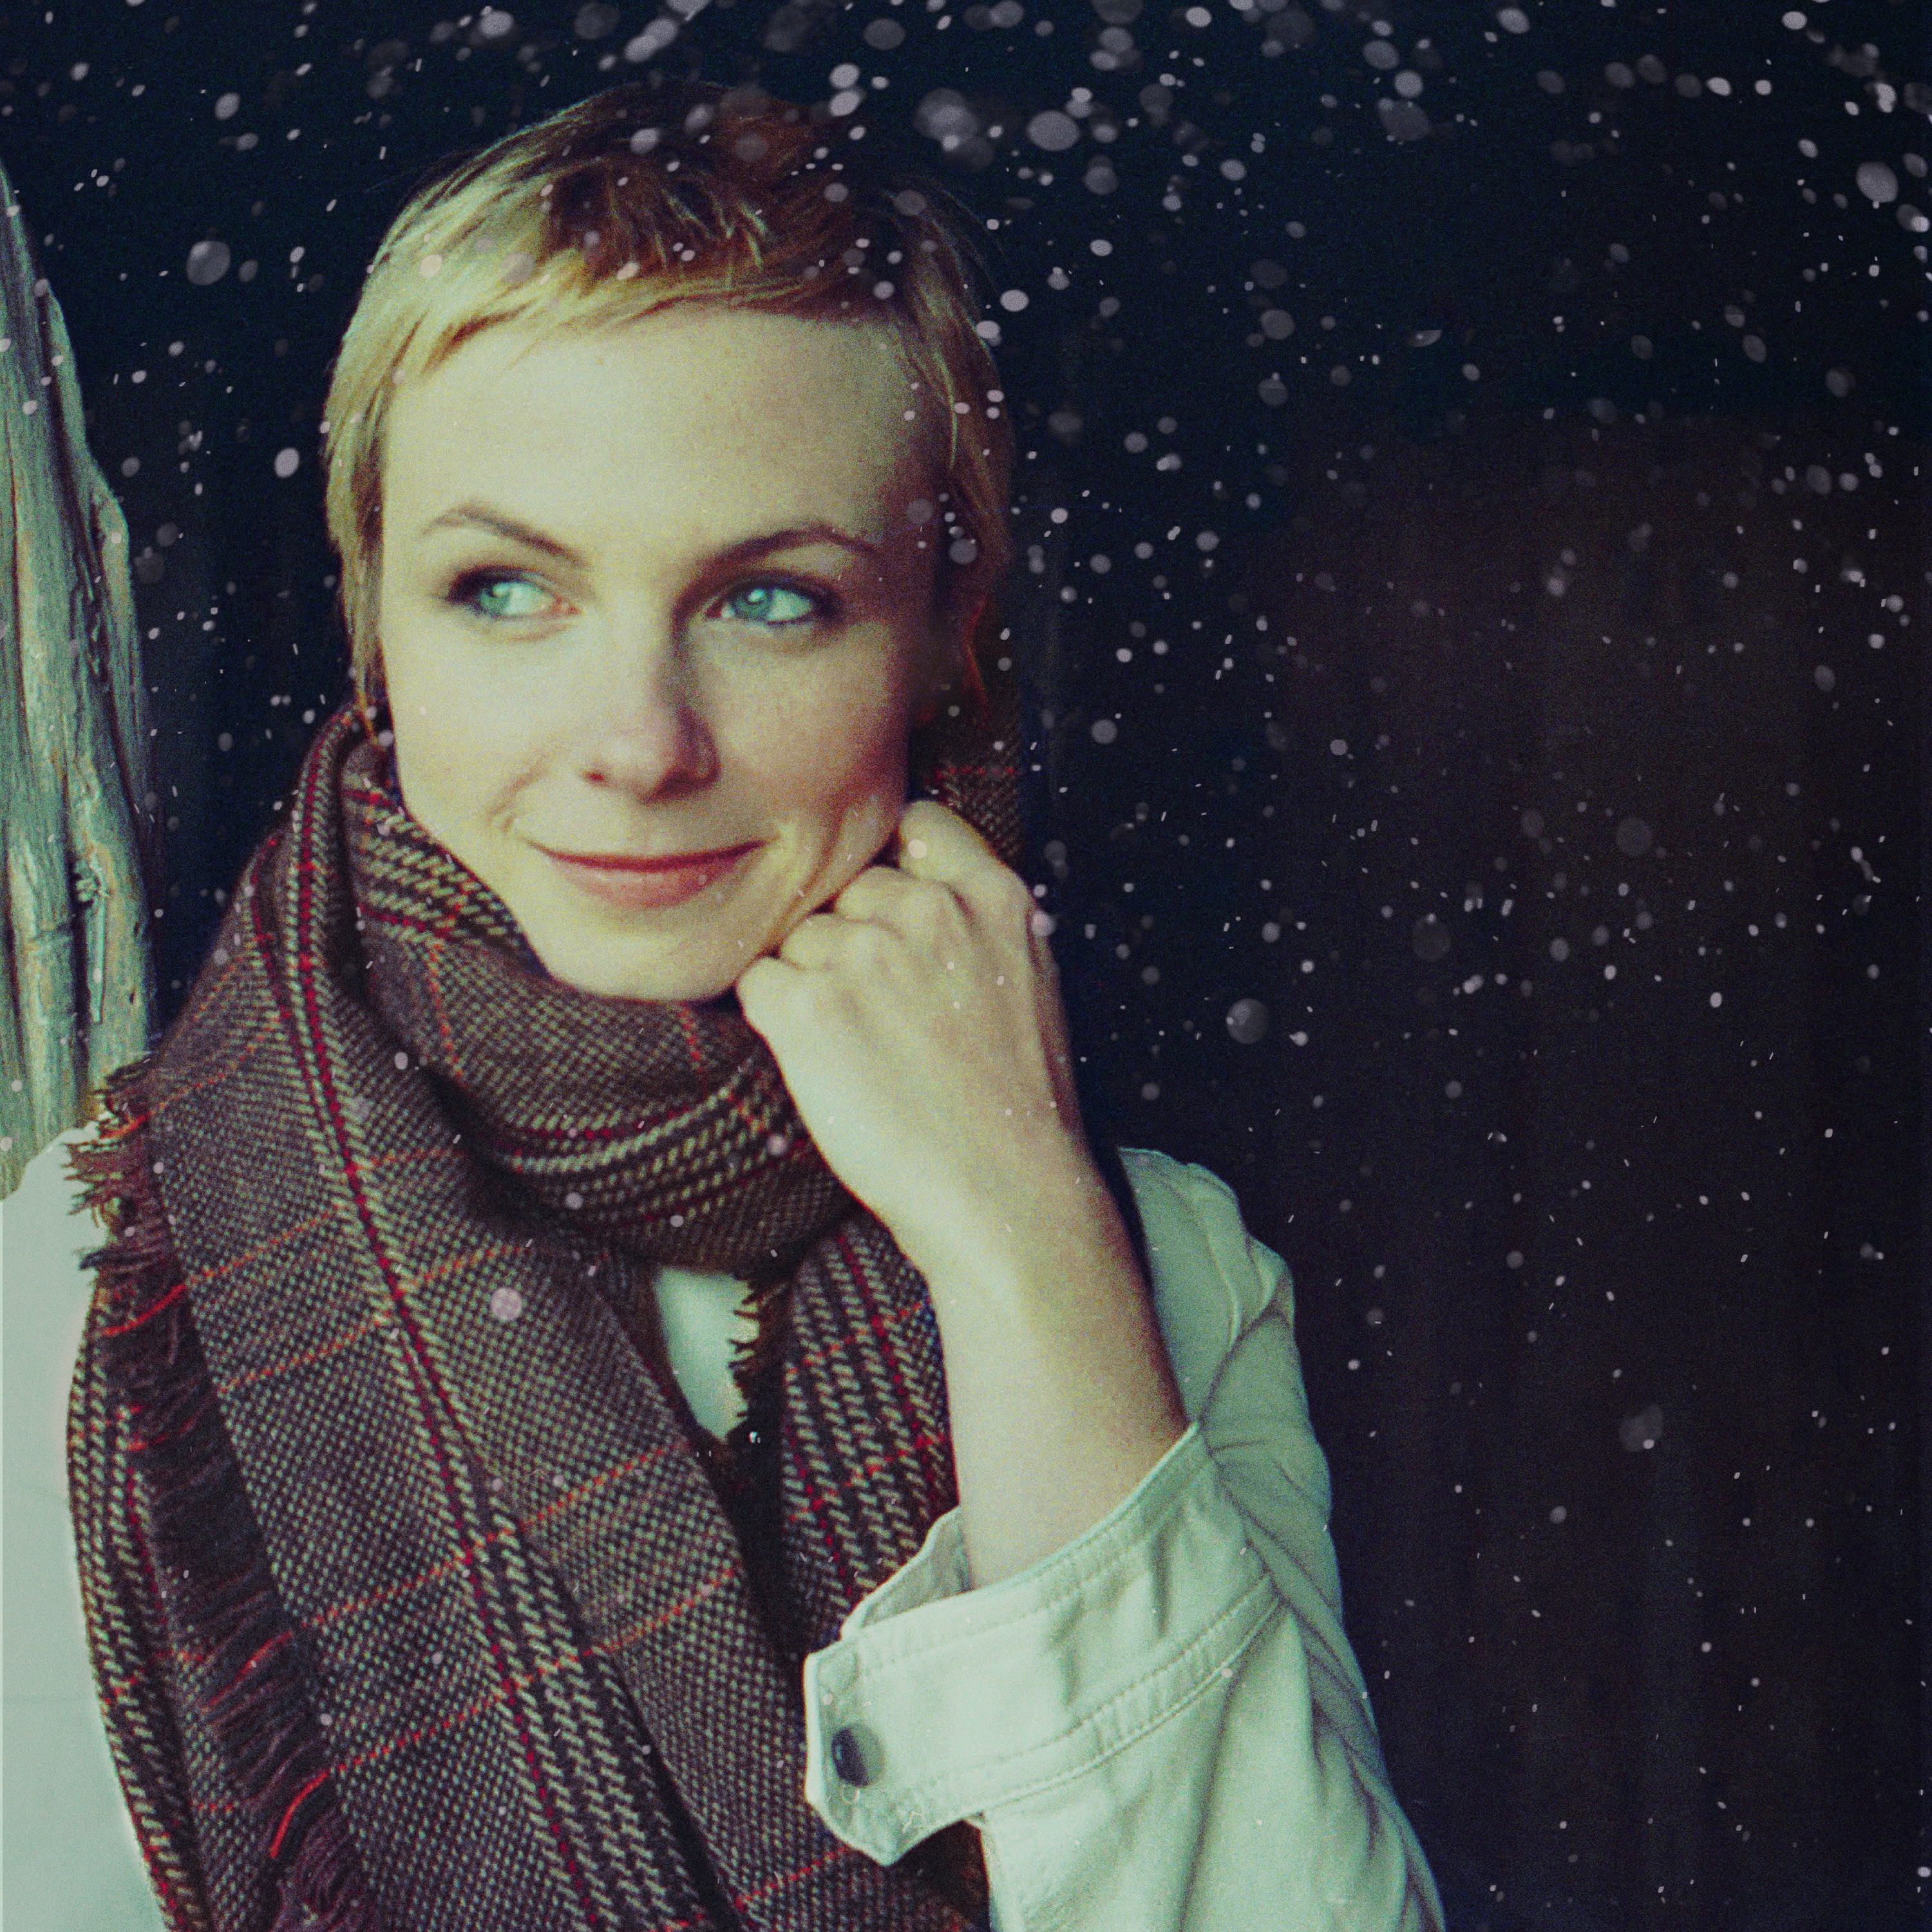 Wearing a scarf, Kat Edmonson looks off to the left